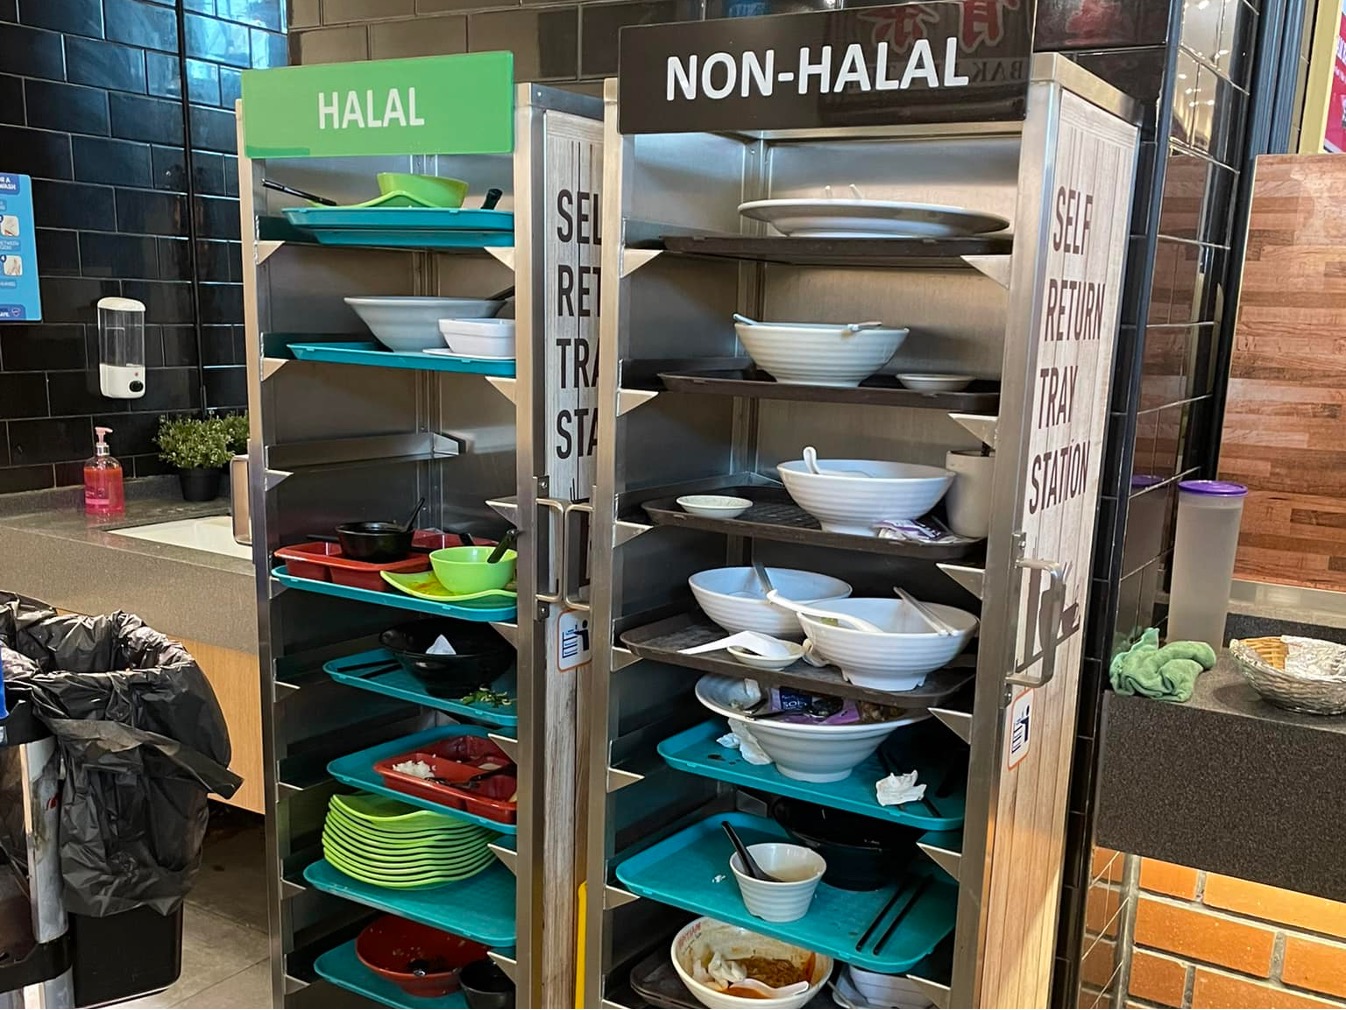 It’s Really Not That Hard To Return Halal Trays Where They Belong at Hawker Centres